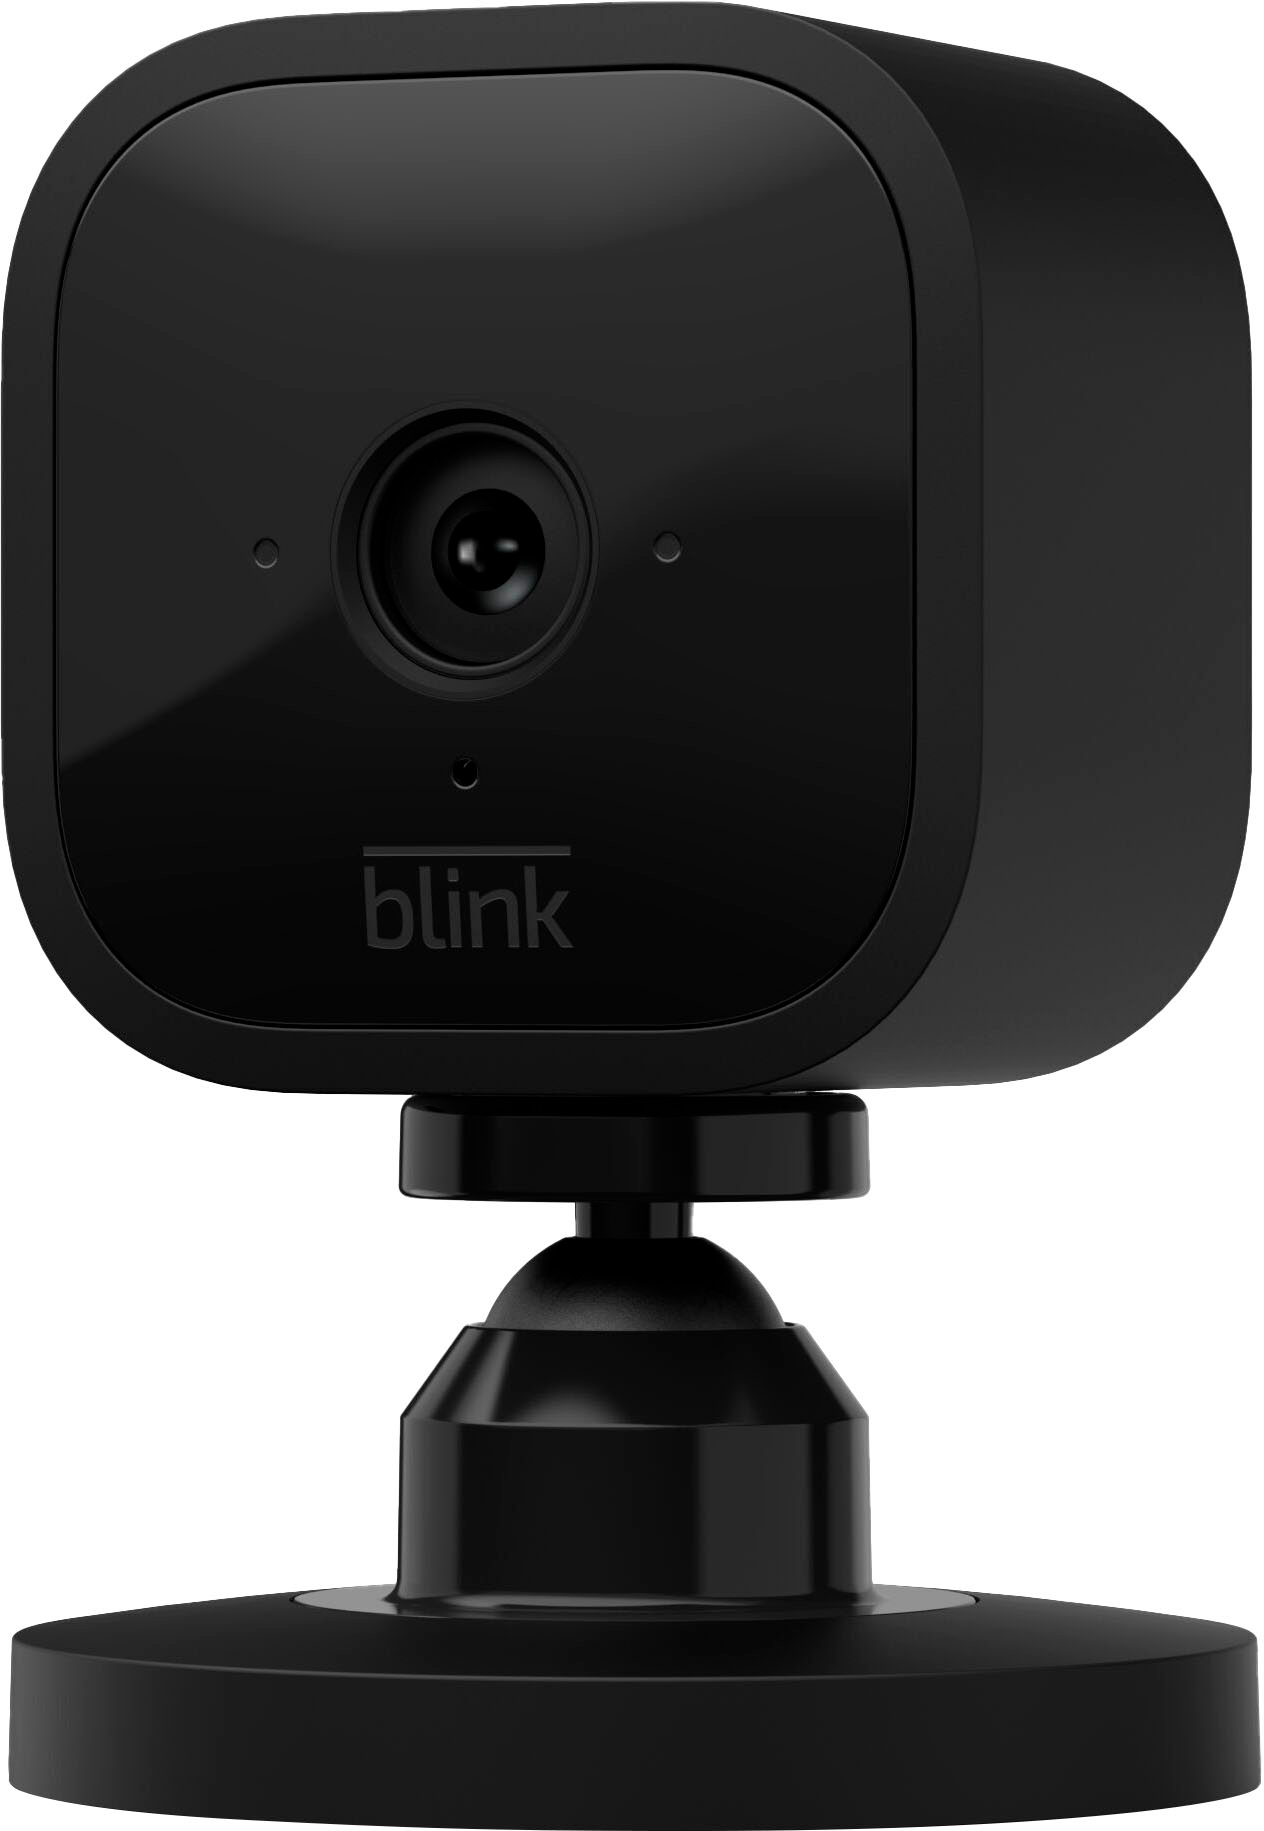 Blink Mini review:  jumps into the budget security camera fray